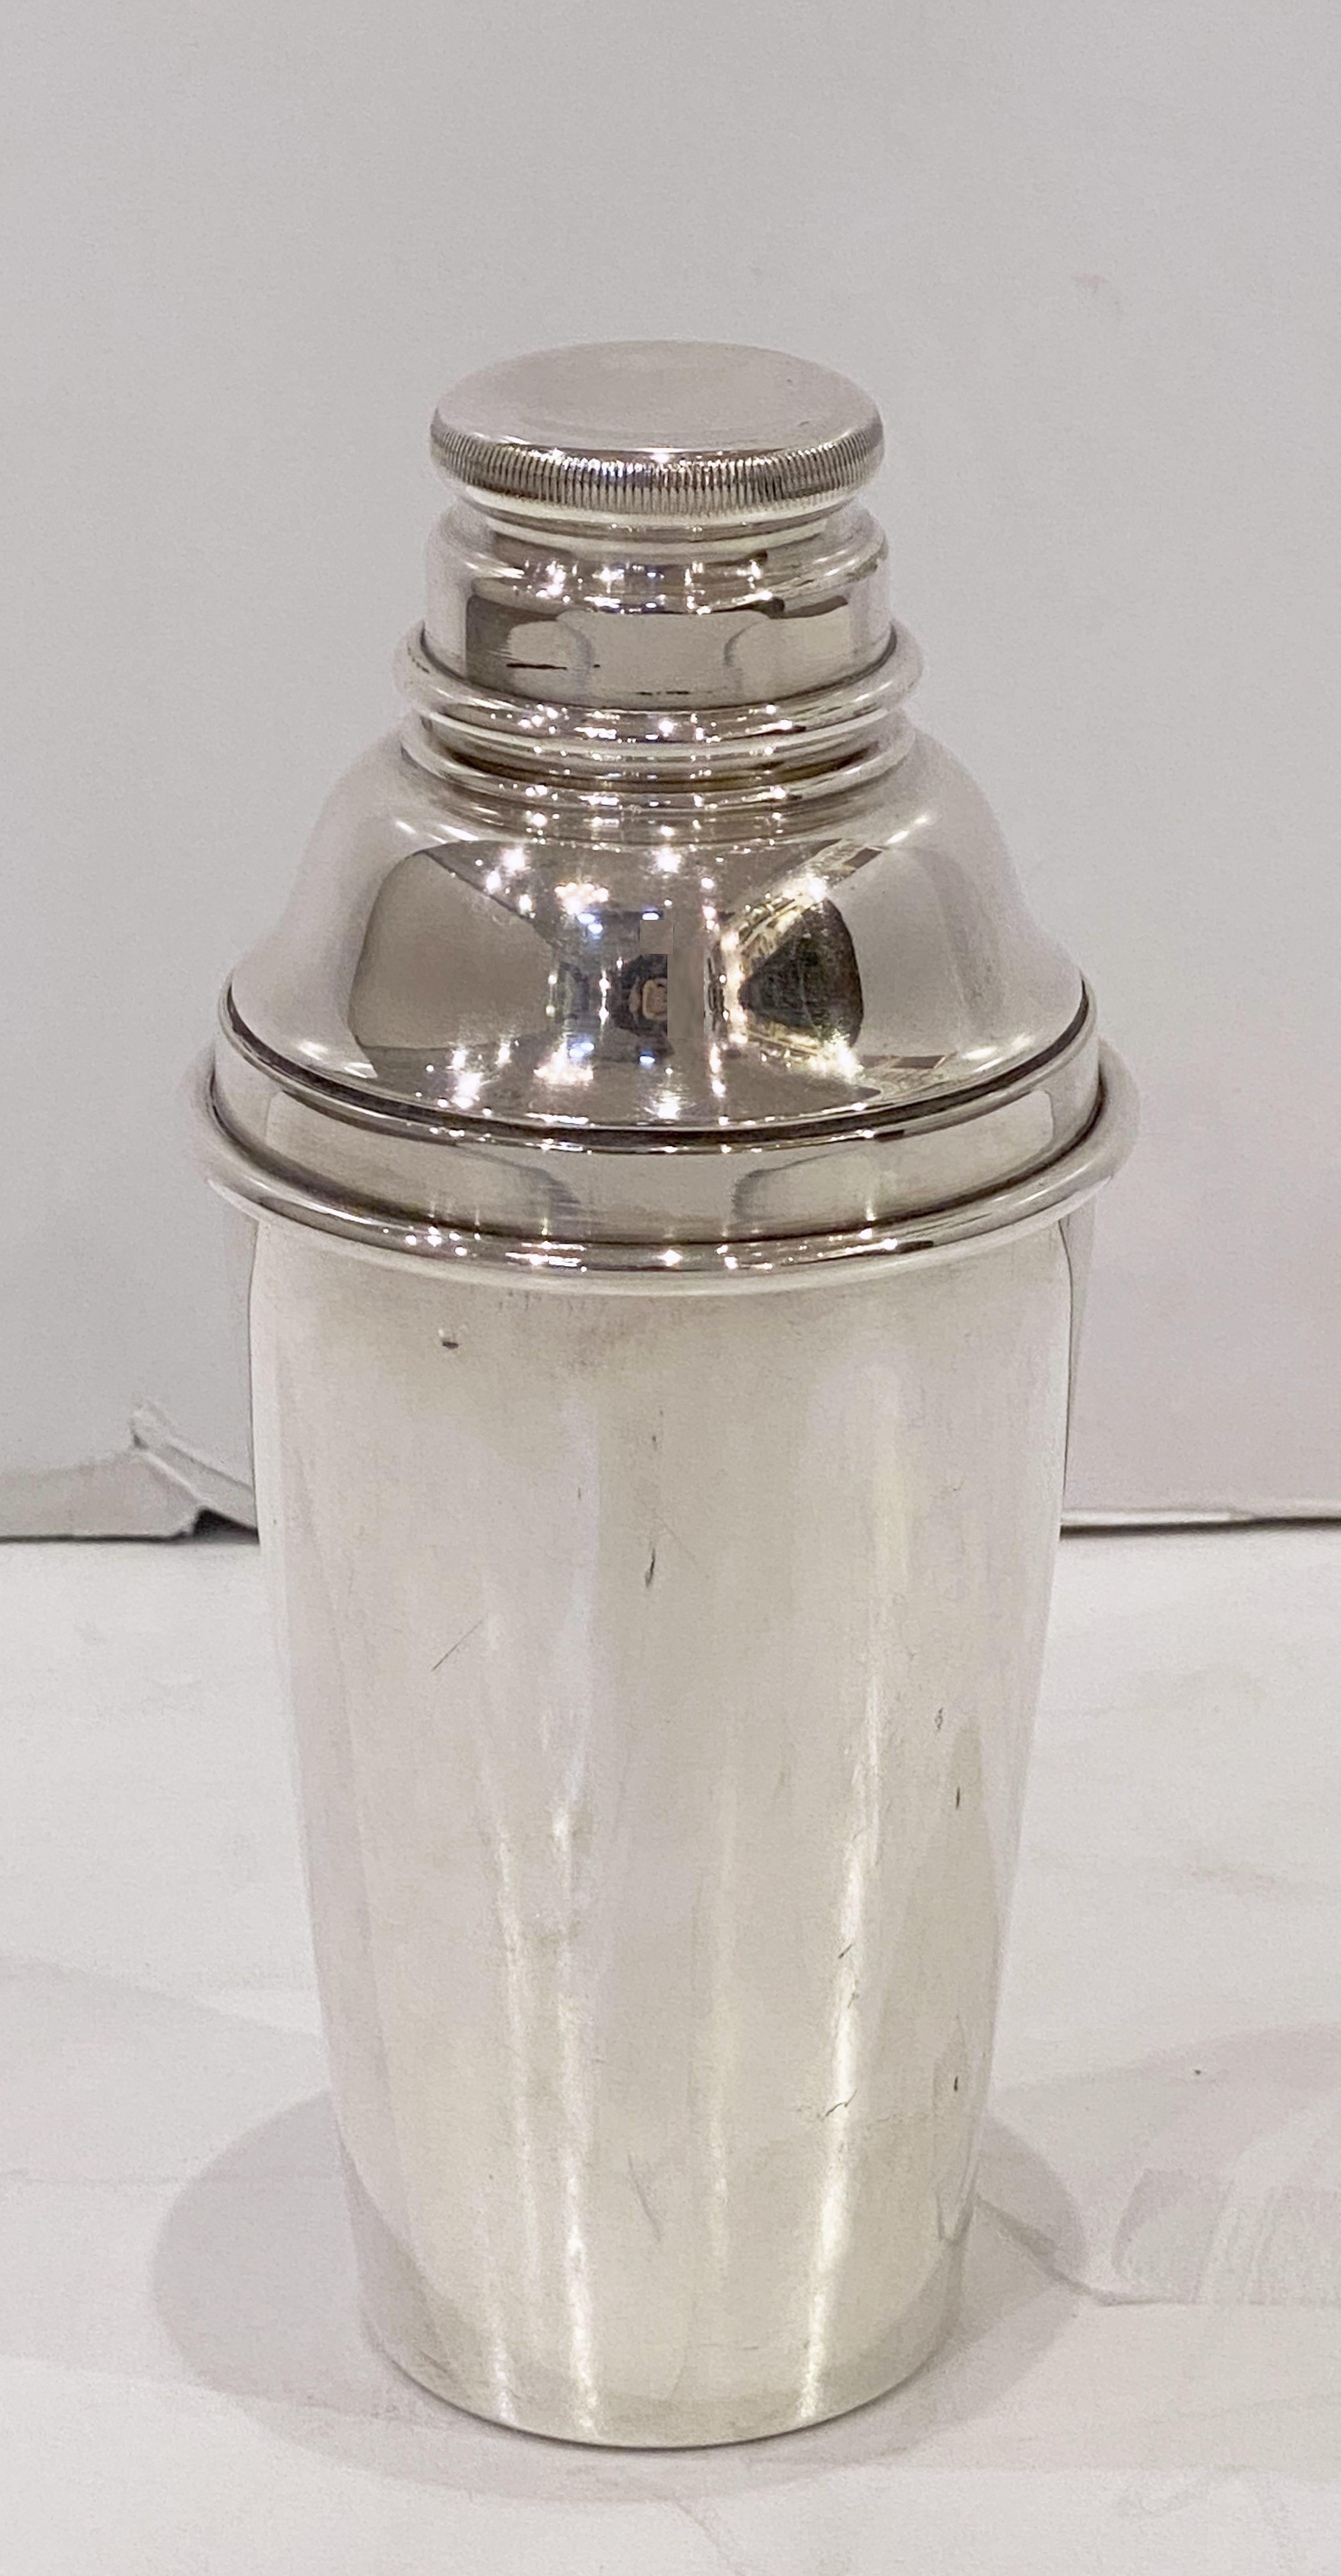 A vintage English cylindrical martini or cocktail shaker of fine plate silver from the Art Deco period, circa 1930-1940, with engine-turned removable cap and strainer.

Marked on base: Gaskell and Chambers, Birmingham.

Gaskell & Chambers’ roots